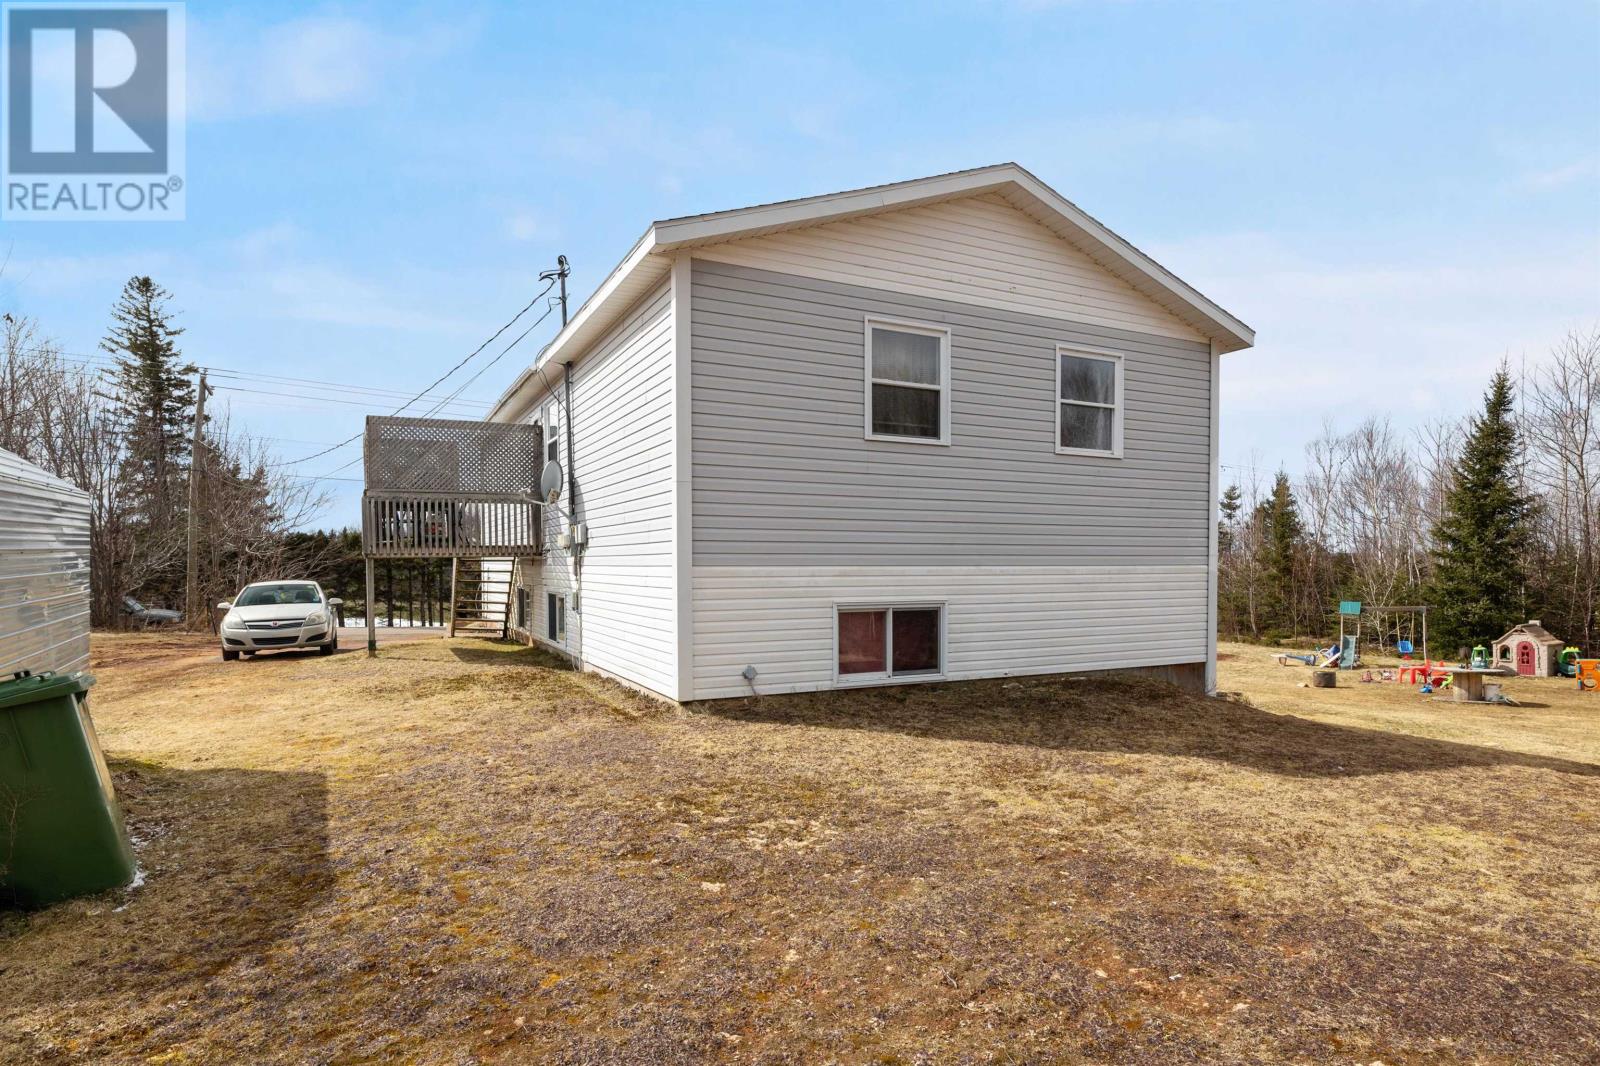 5819/5821 Campbell Road, Victoria Cross, Montague, Prince Edward Island  C0A 1R0 - Photo 2 - 202405401